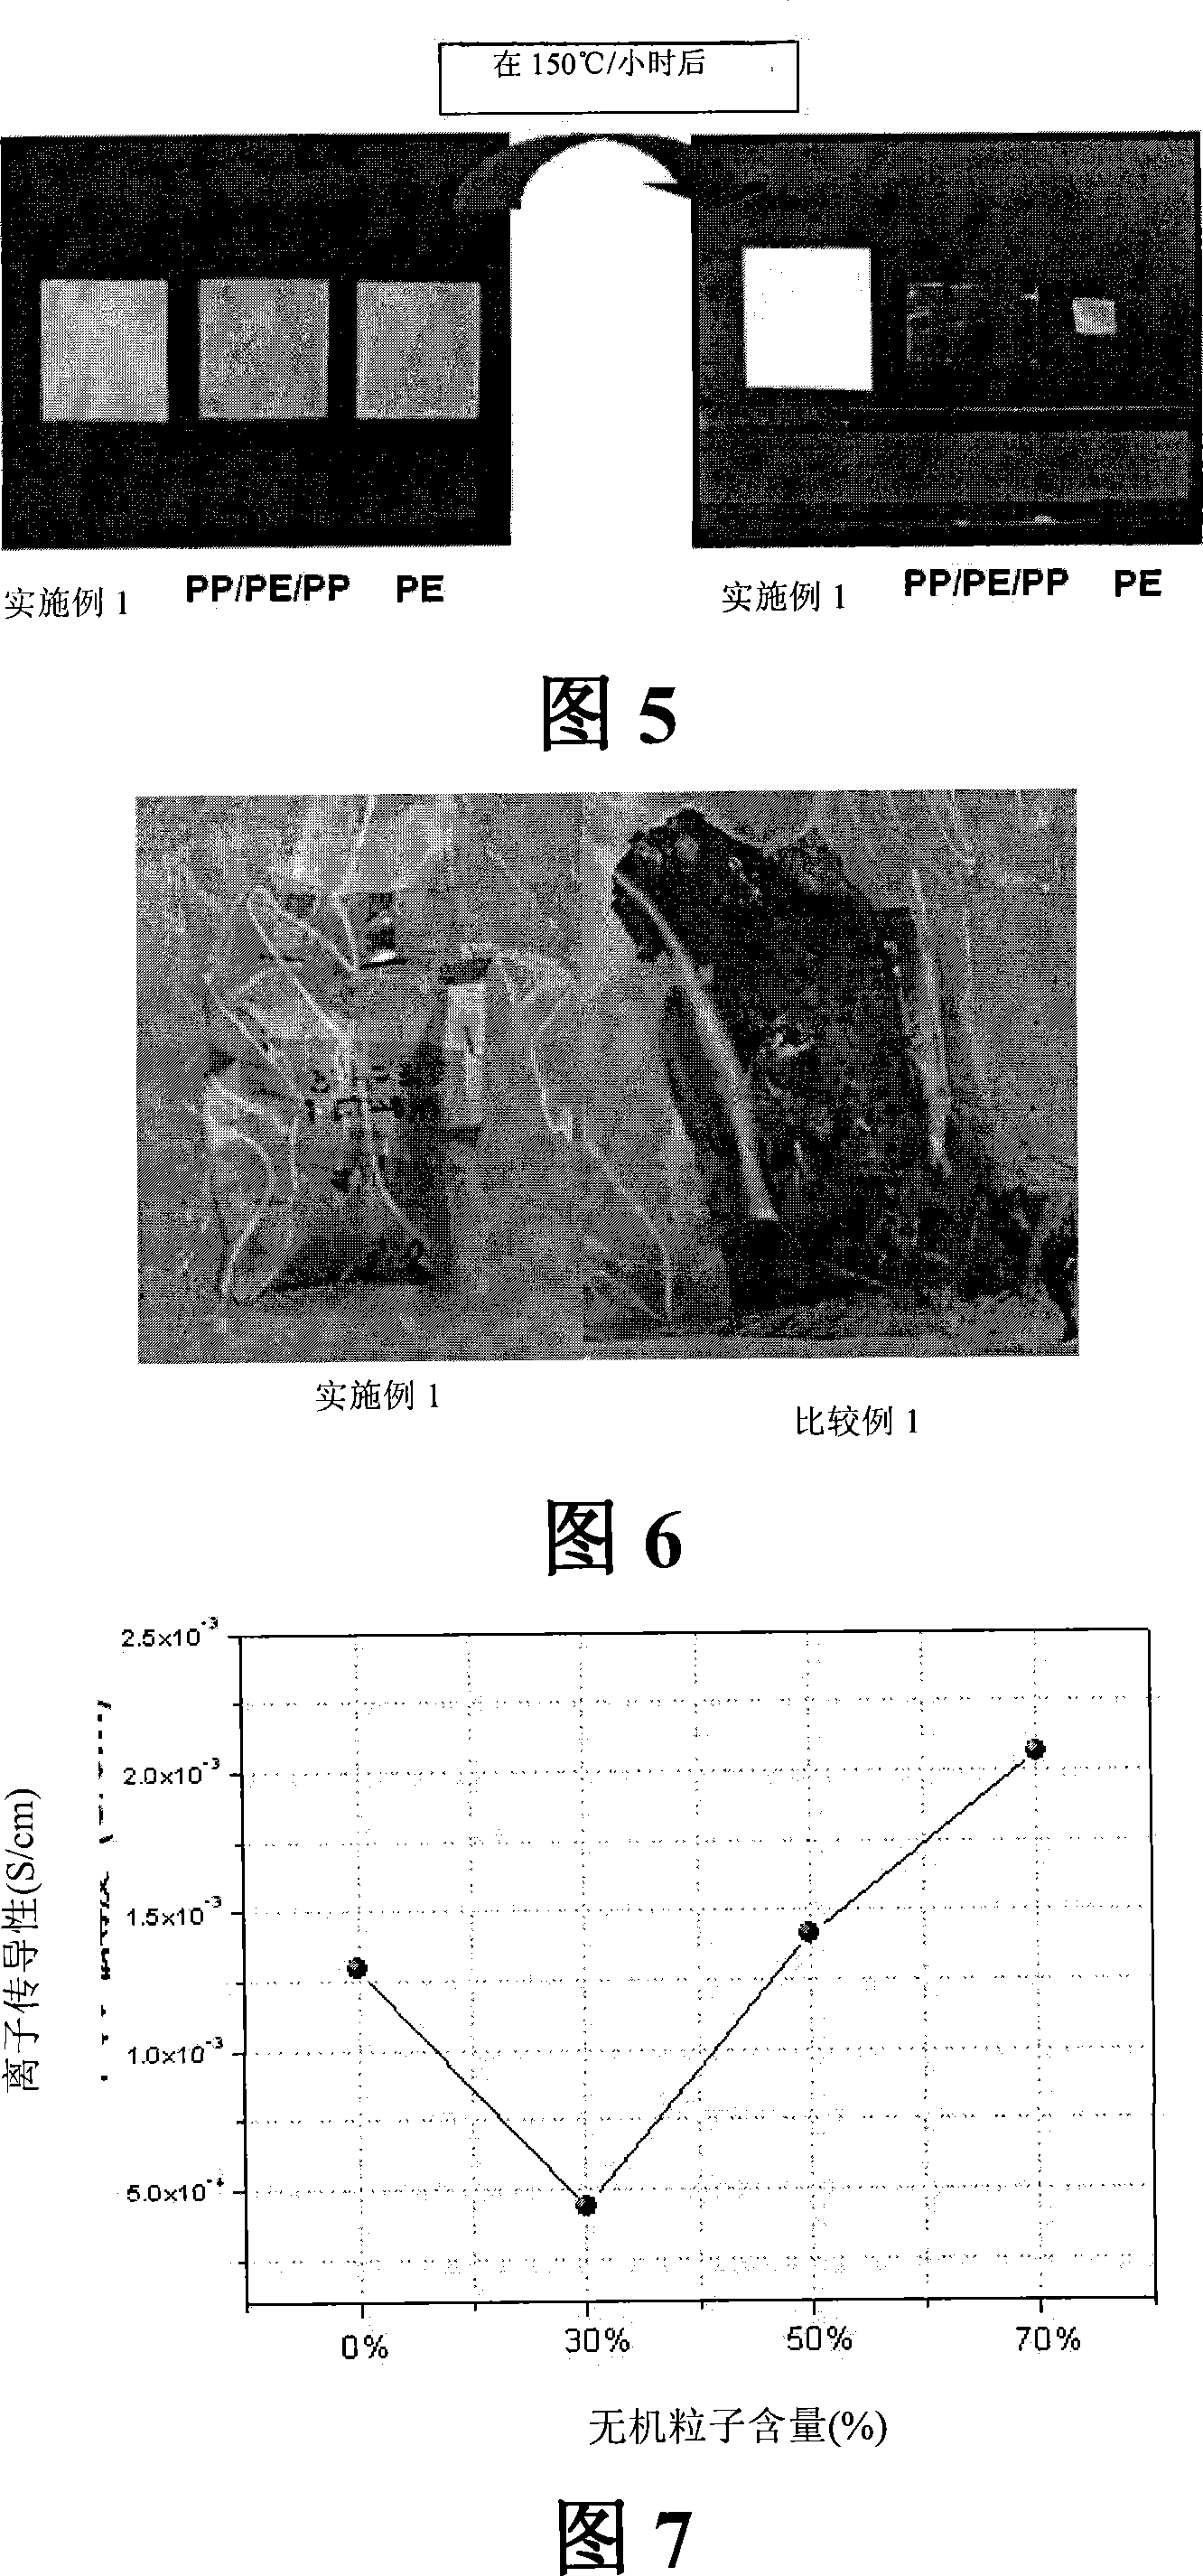 Organic/inorganic composite porous film and electrochemical device prepared thereby